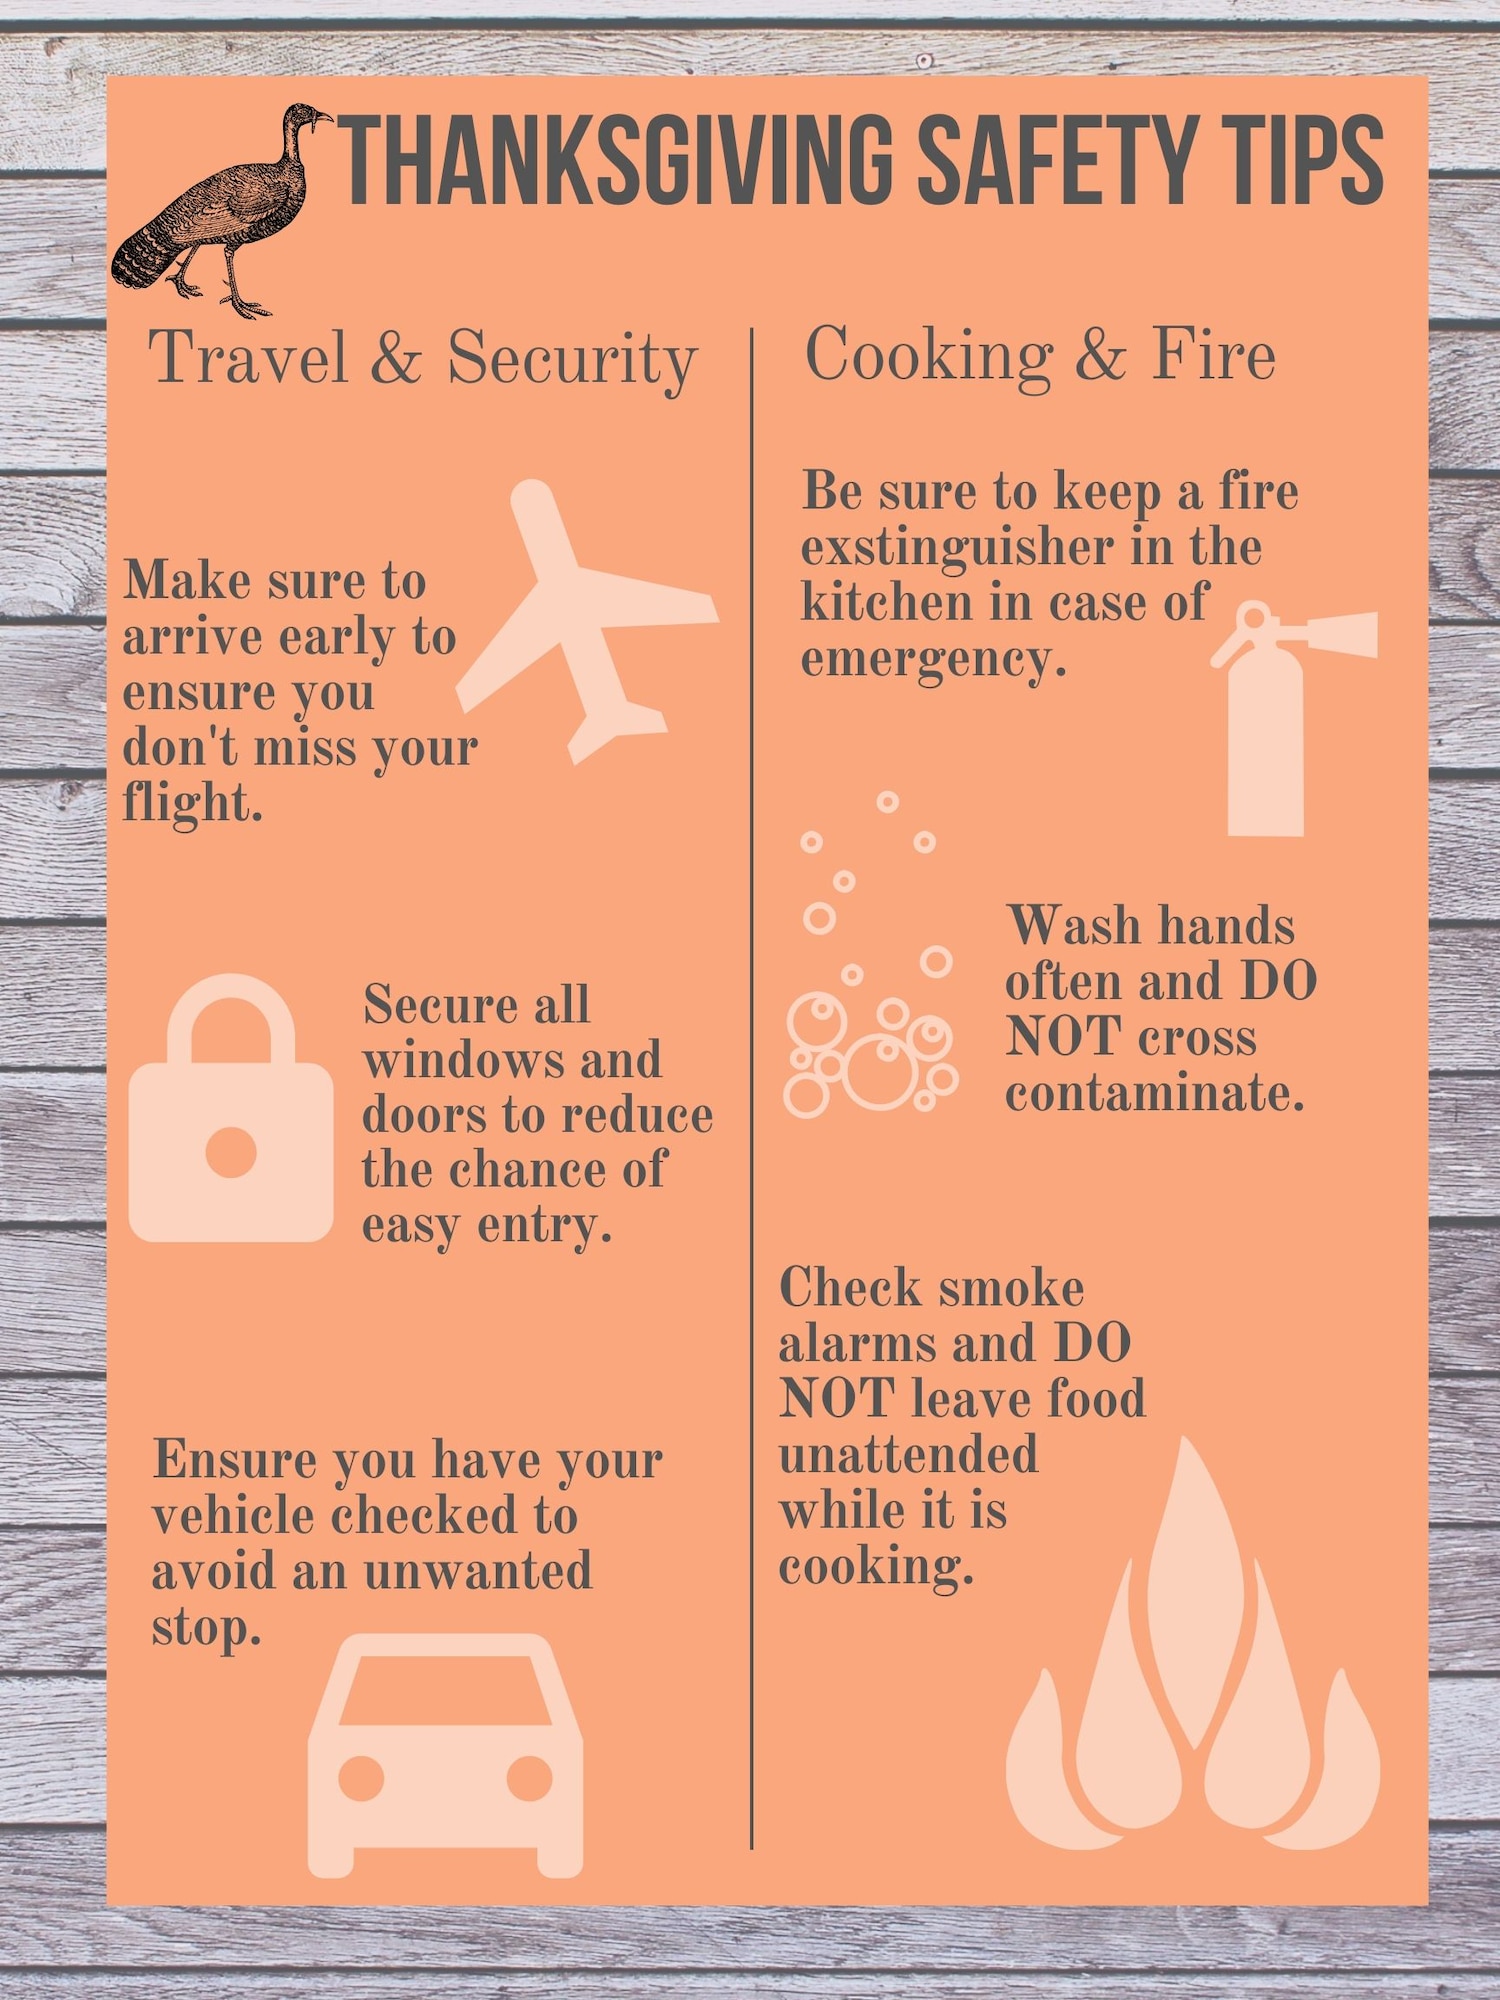 Holiday food preparation and safety tips > Air University (AU) > News